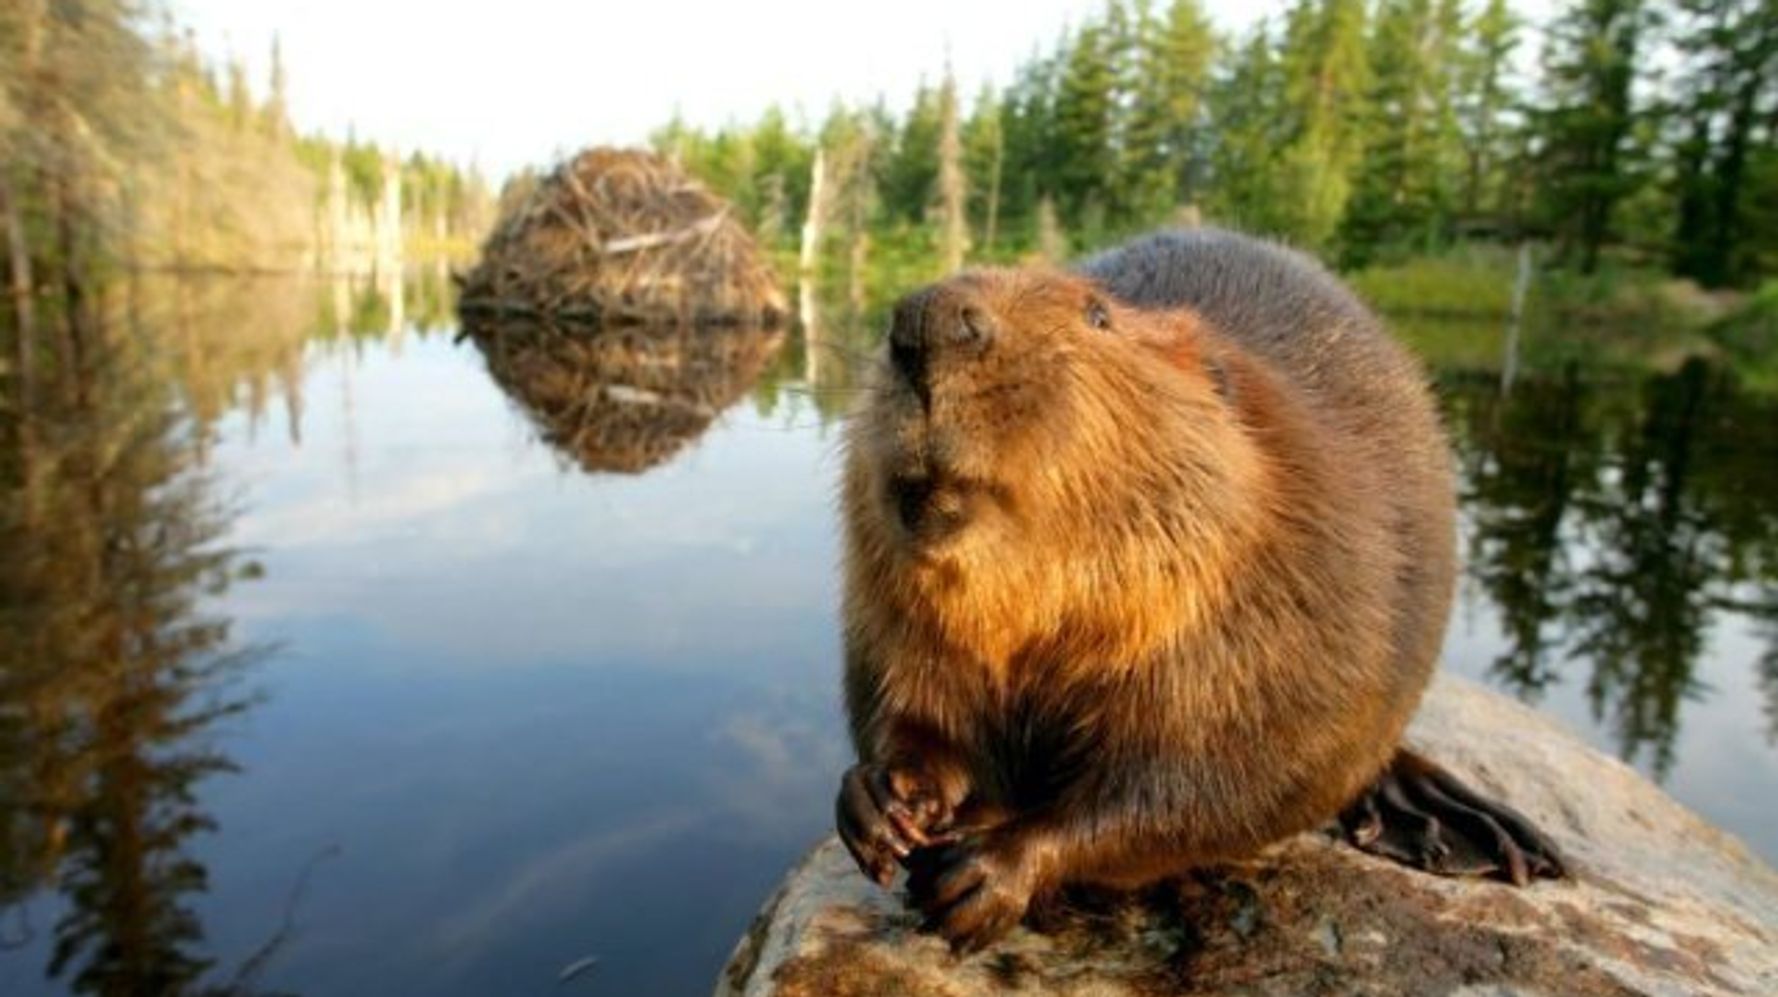 beaver first nations meaning